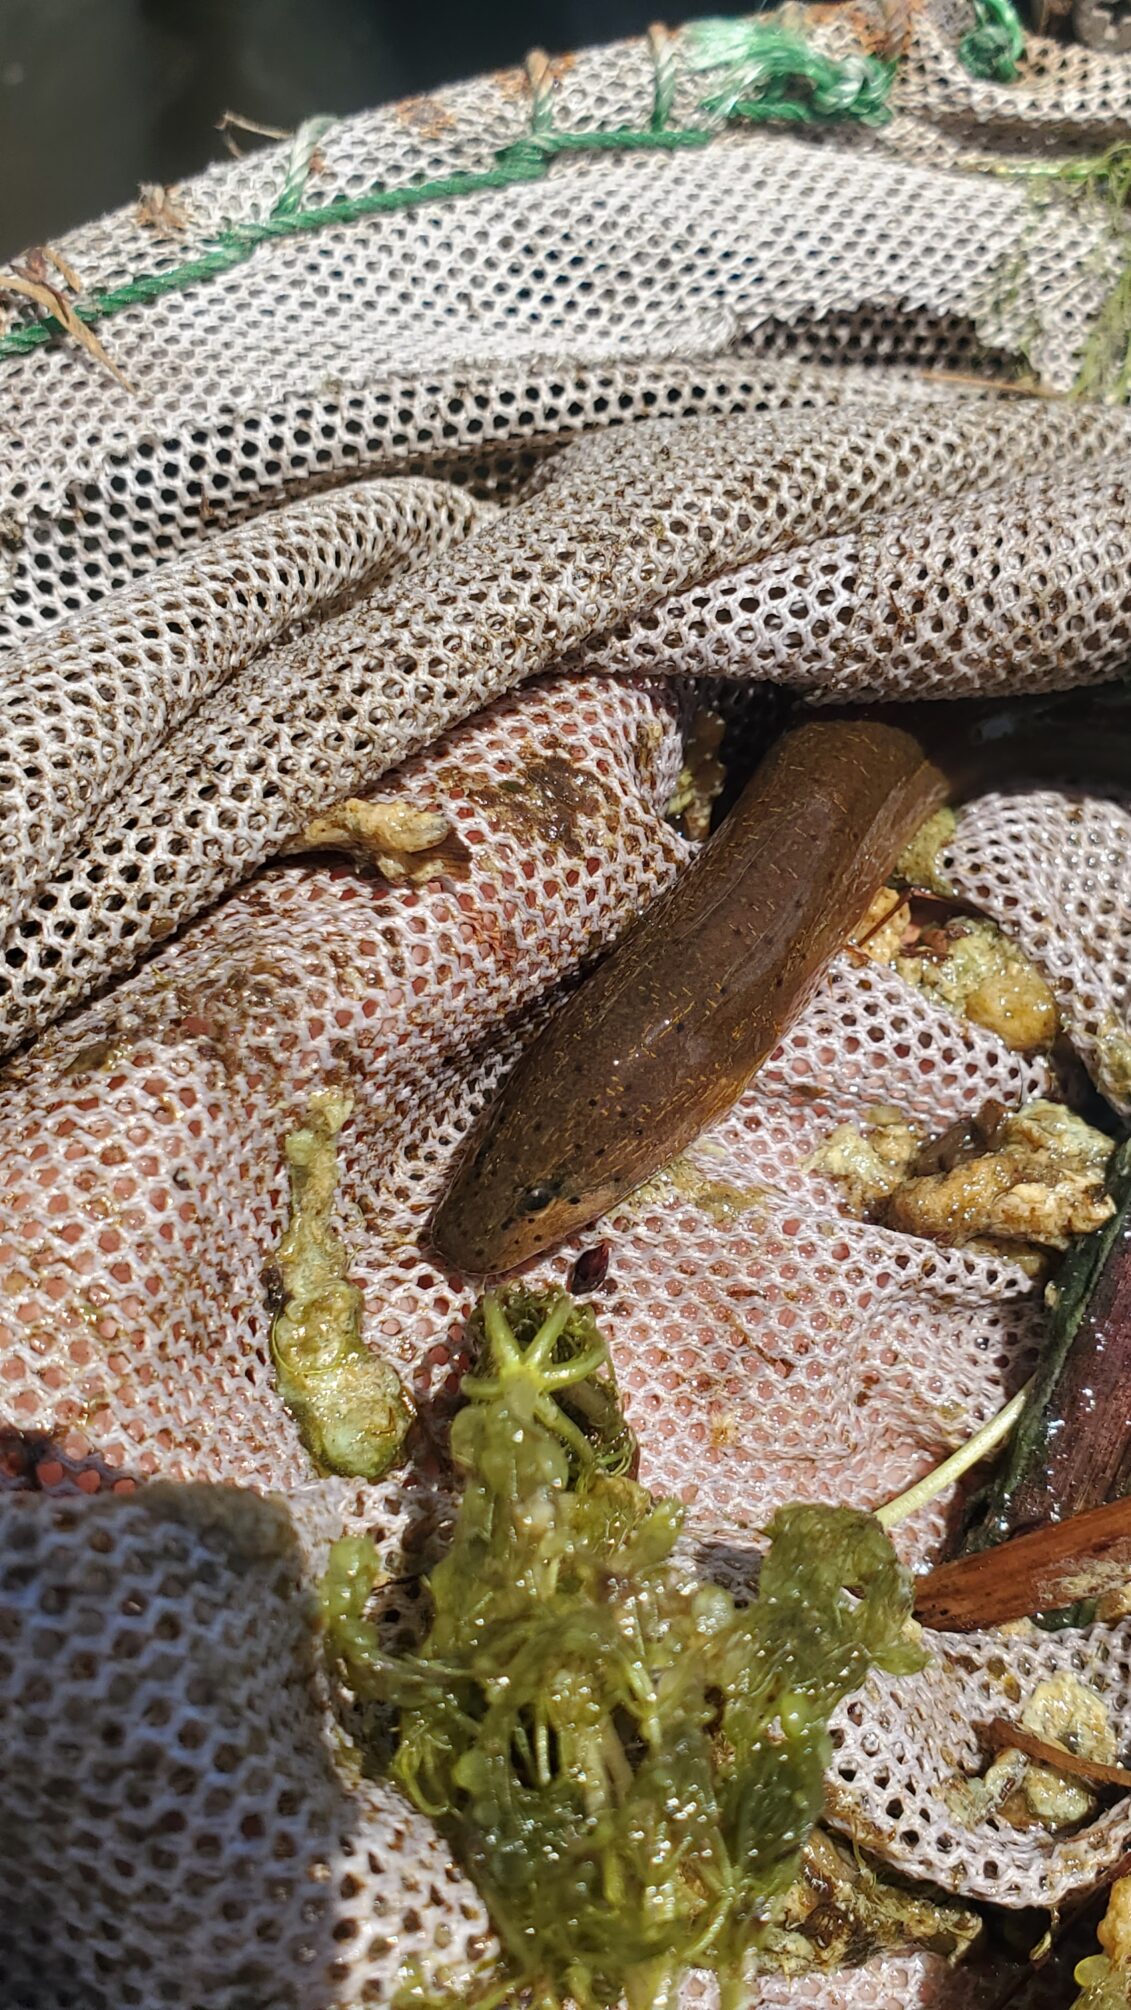 A swamp eel's head pokes out of a beige net in the middle of the frame. Green algae sits beside the snake-like invasive.